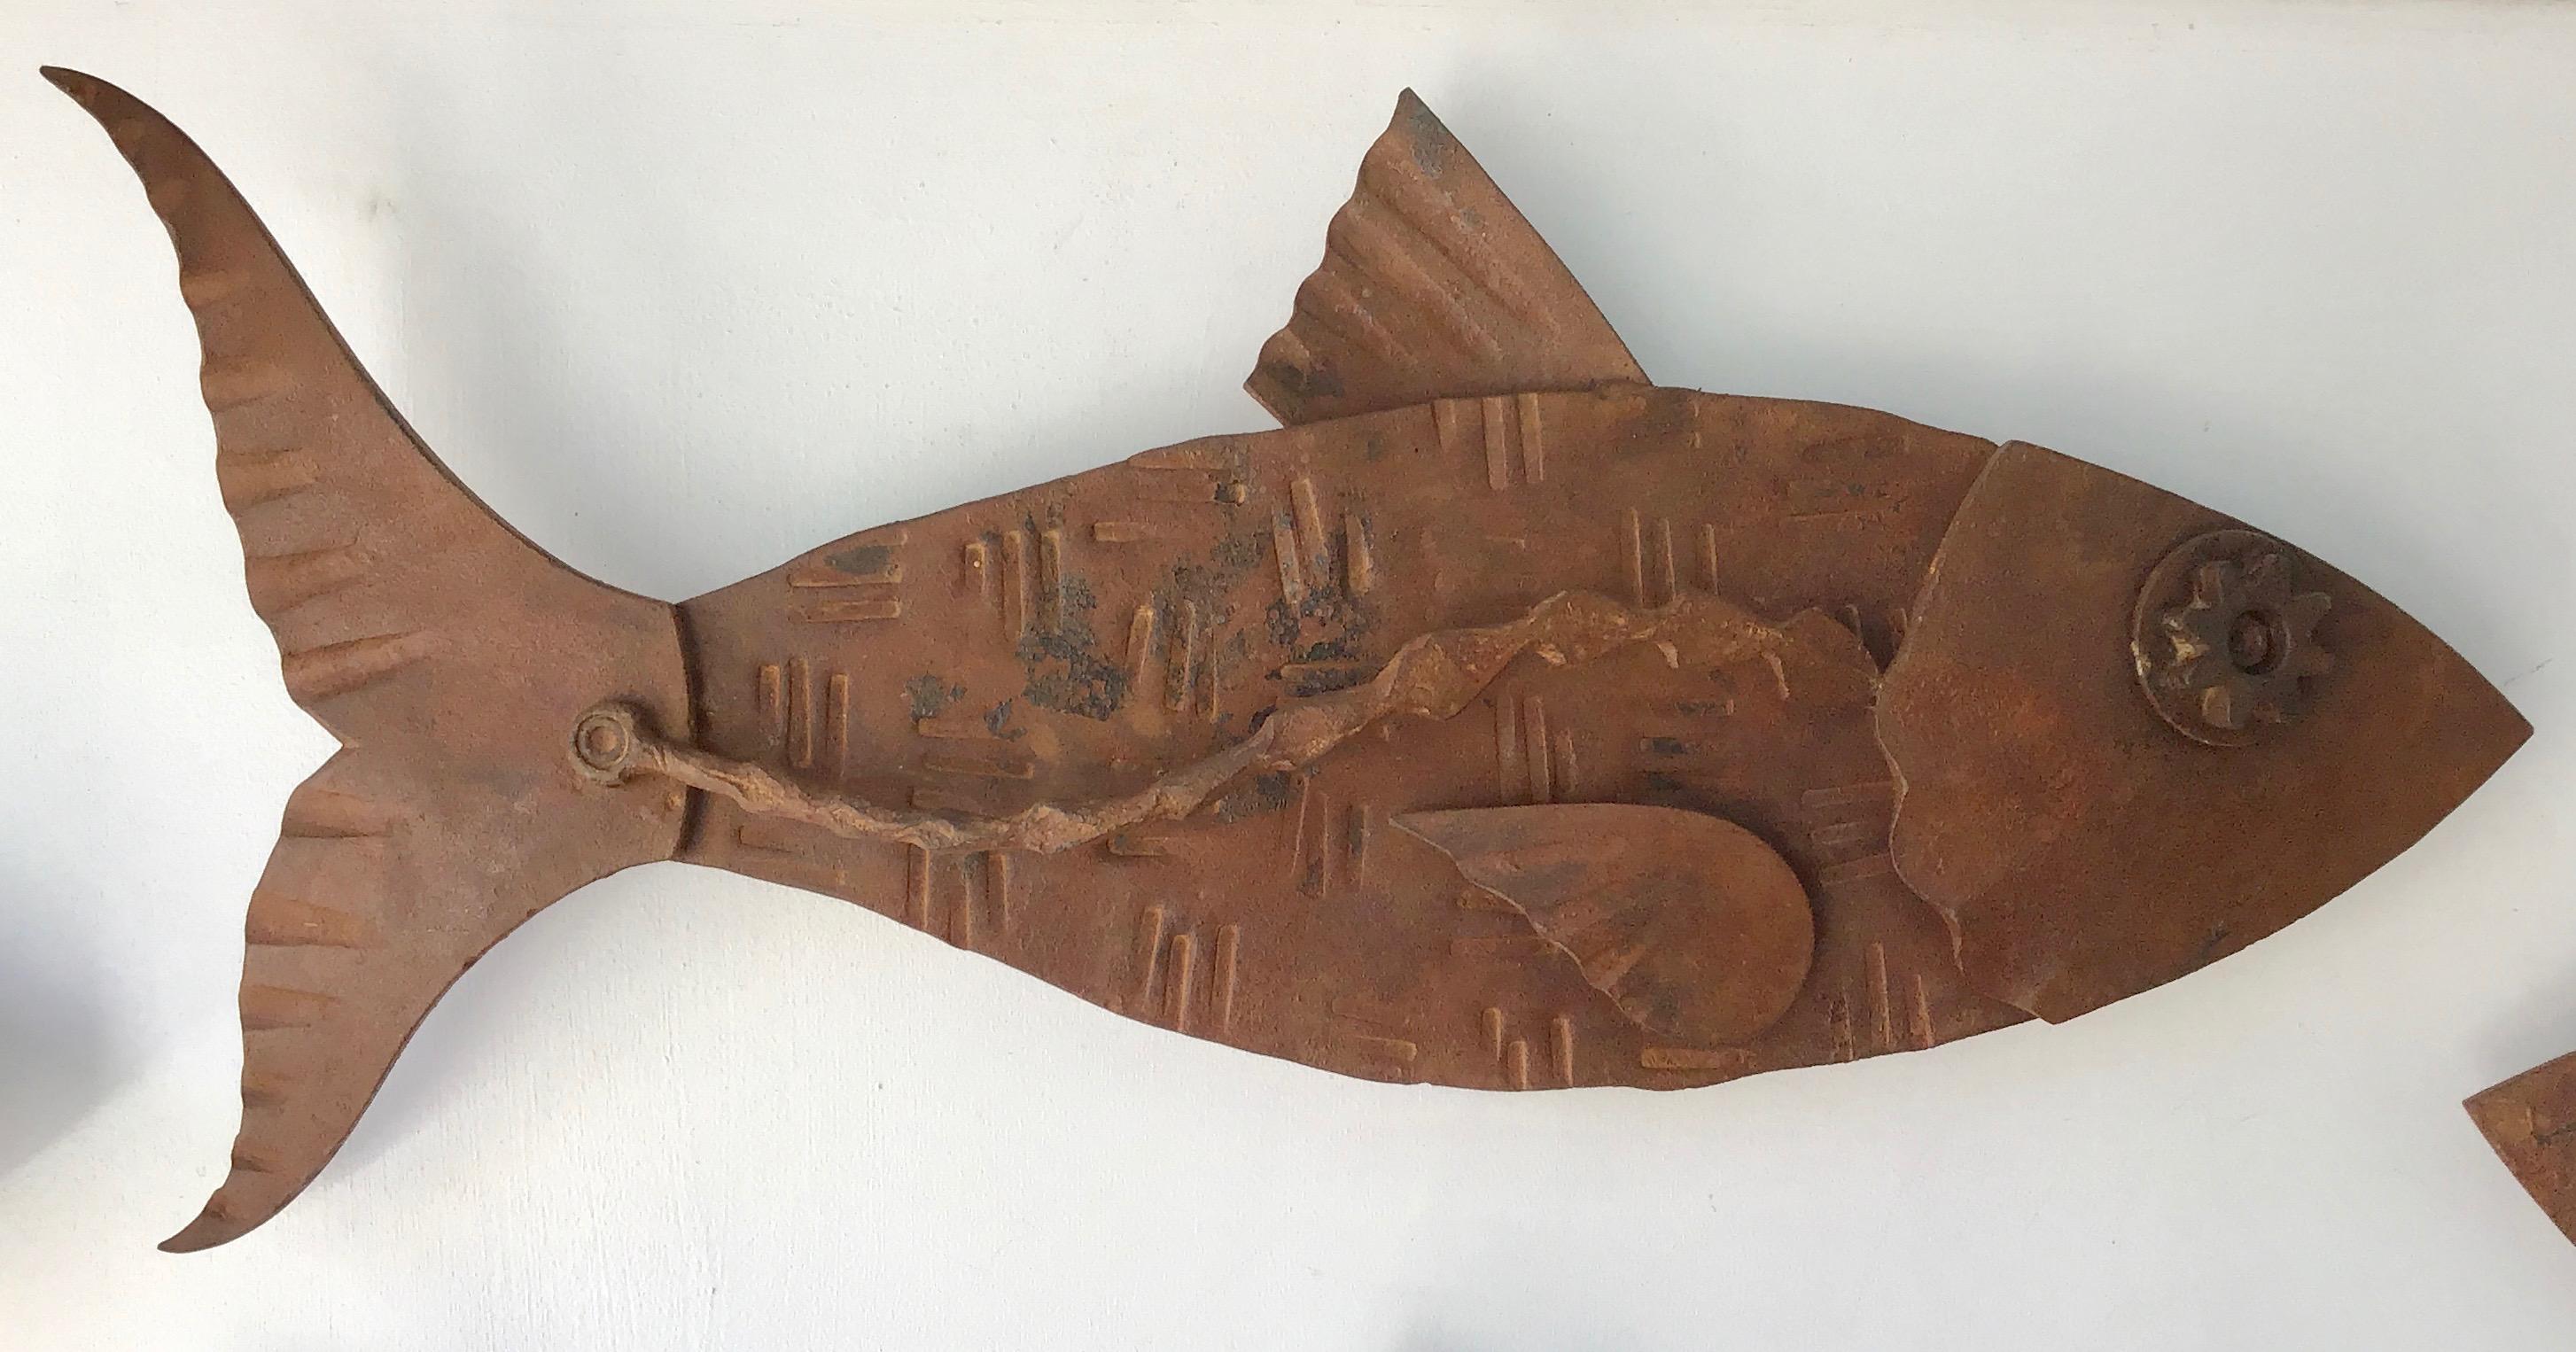 "Alubulidae 4" Hand forged salvaged steel fish wall sculpture